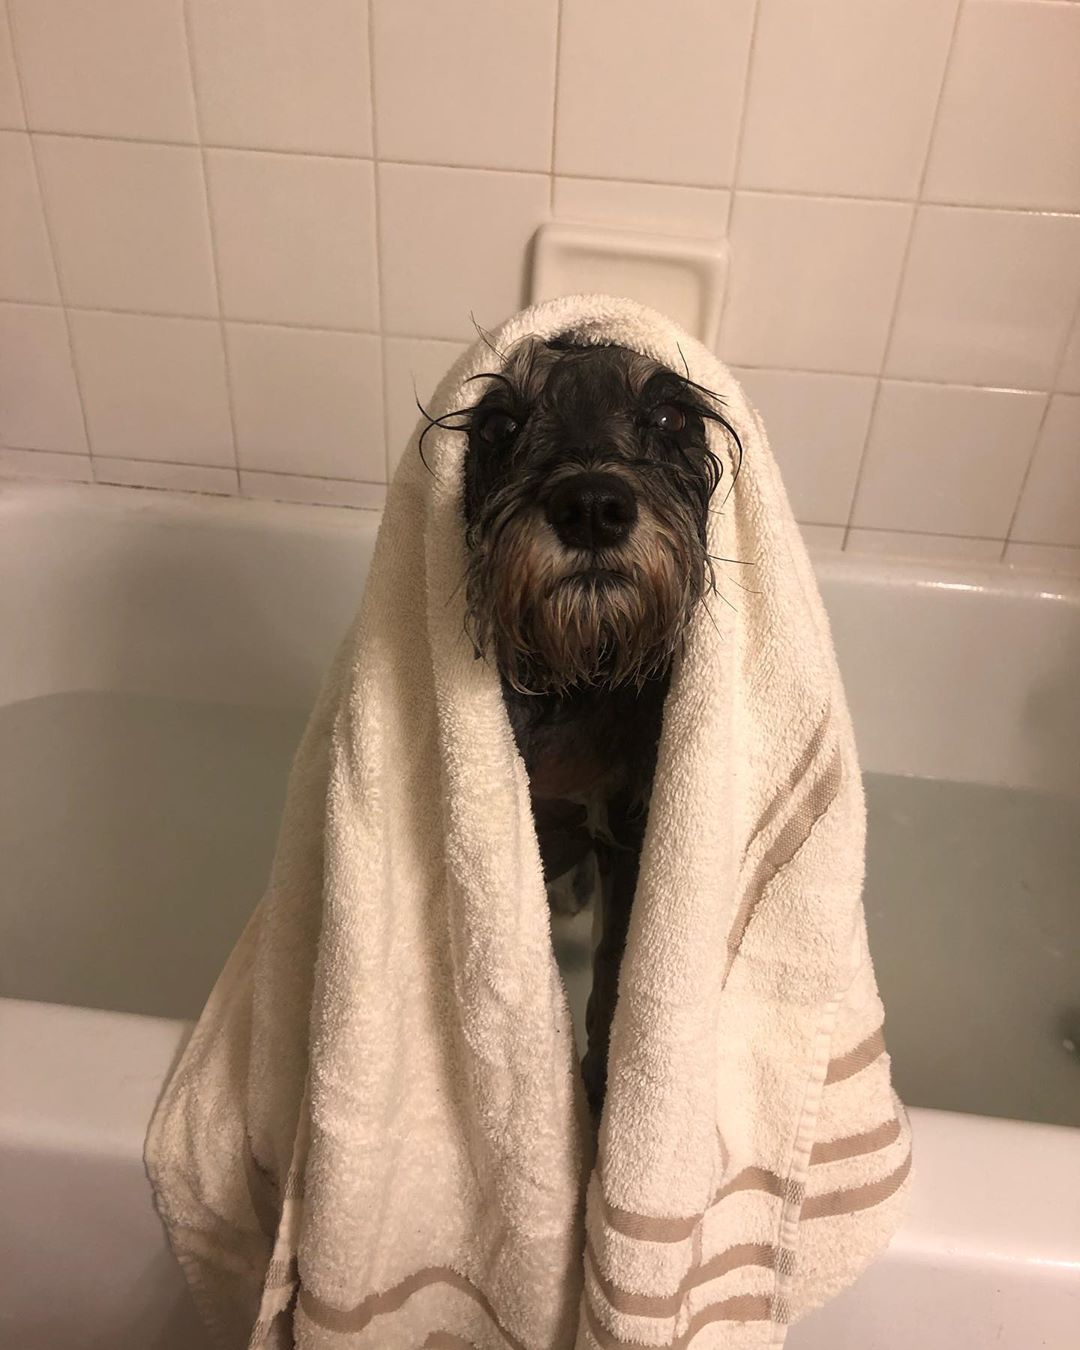 Schnauzer standing inside the bathtub with a towel over his head